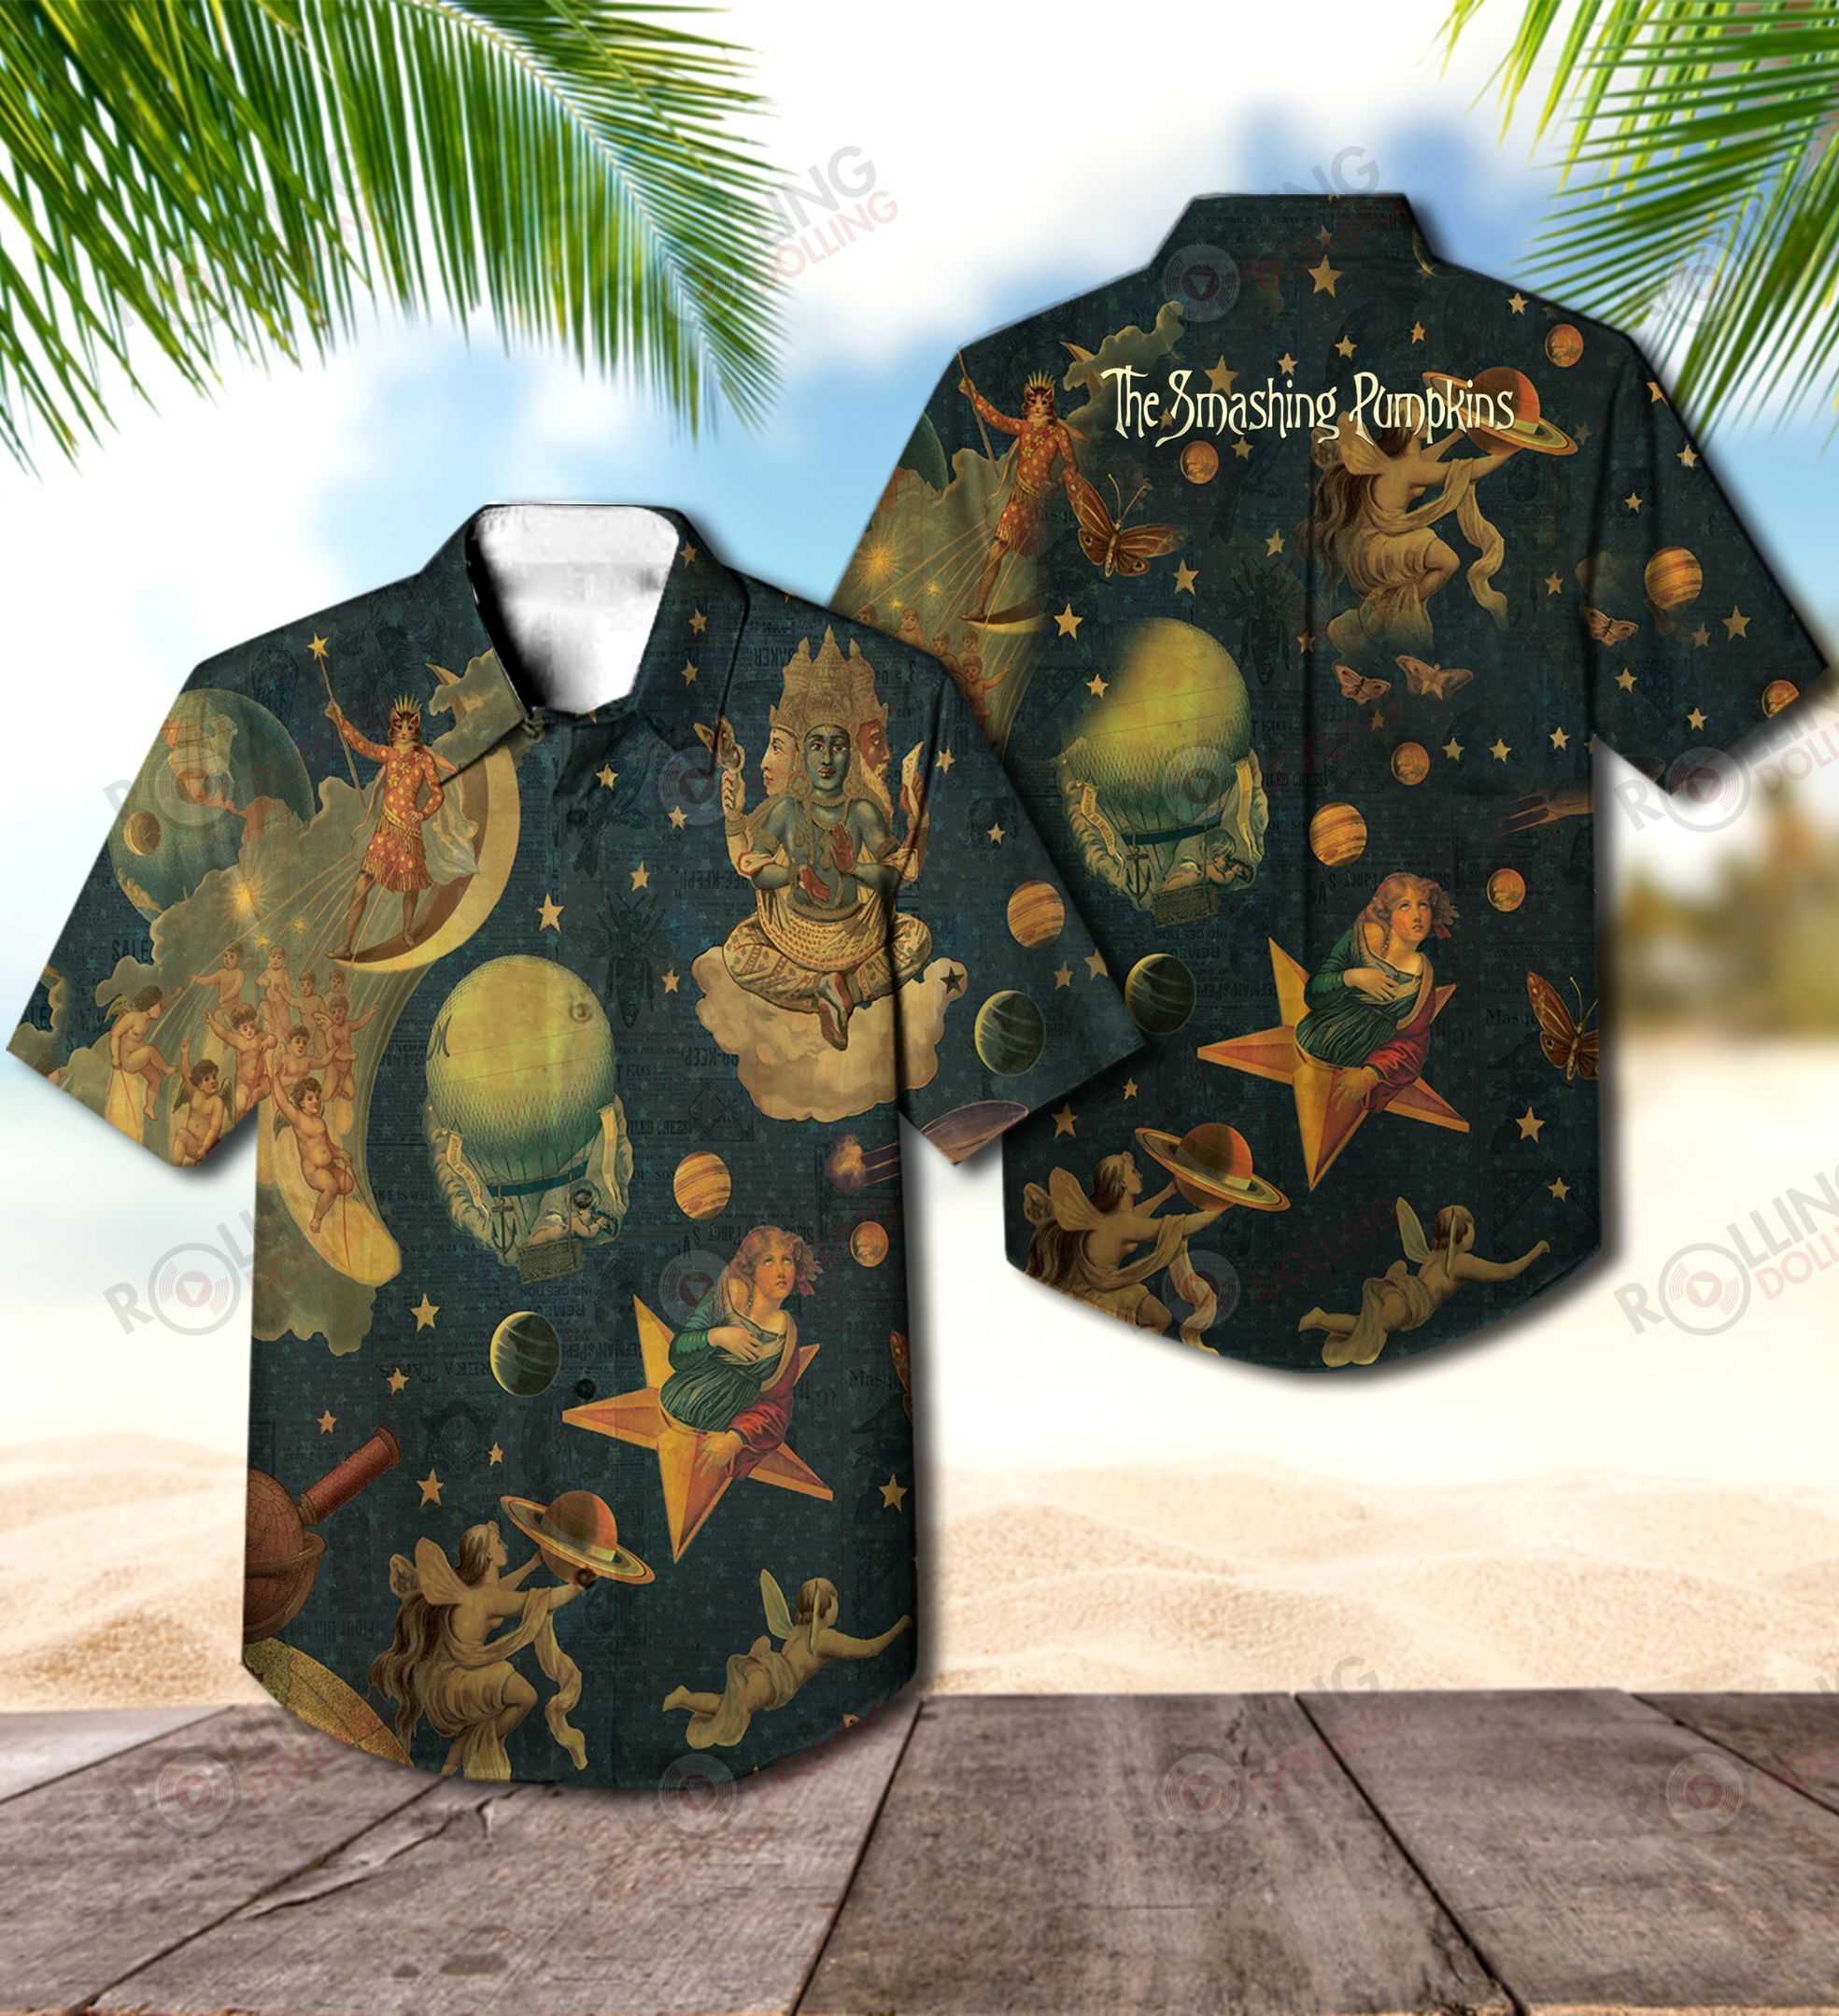 We have compiled a list of some of the best Hawaiian shirt that are available 243